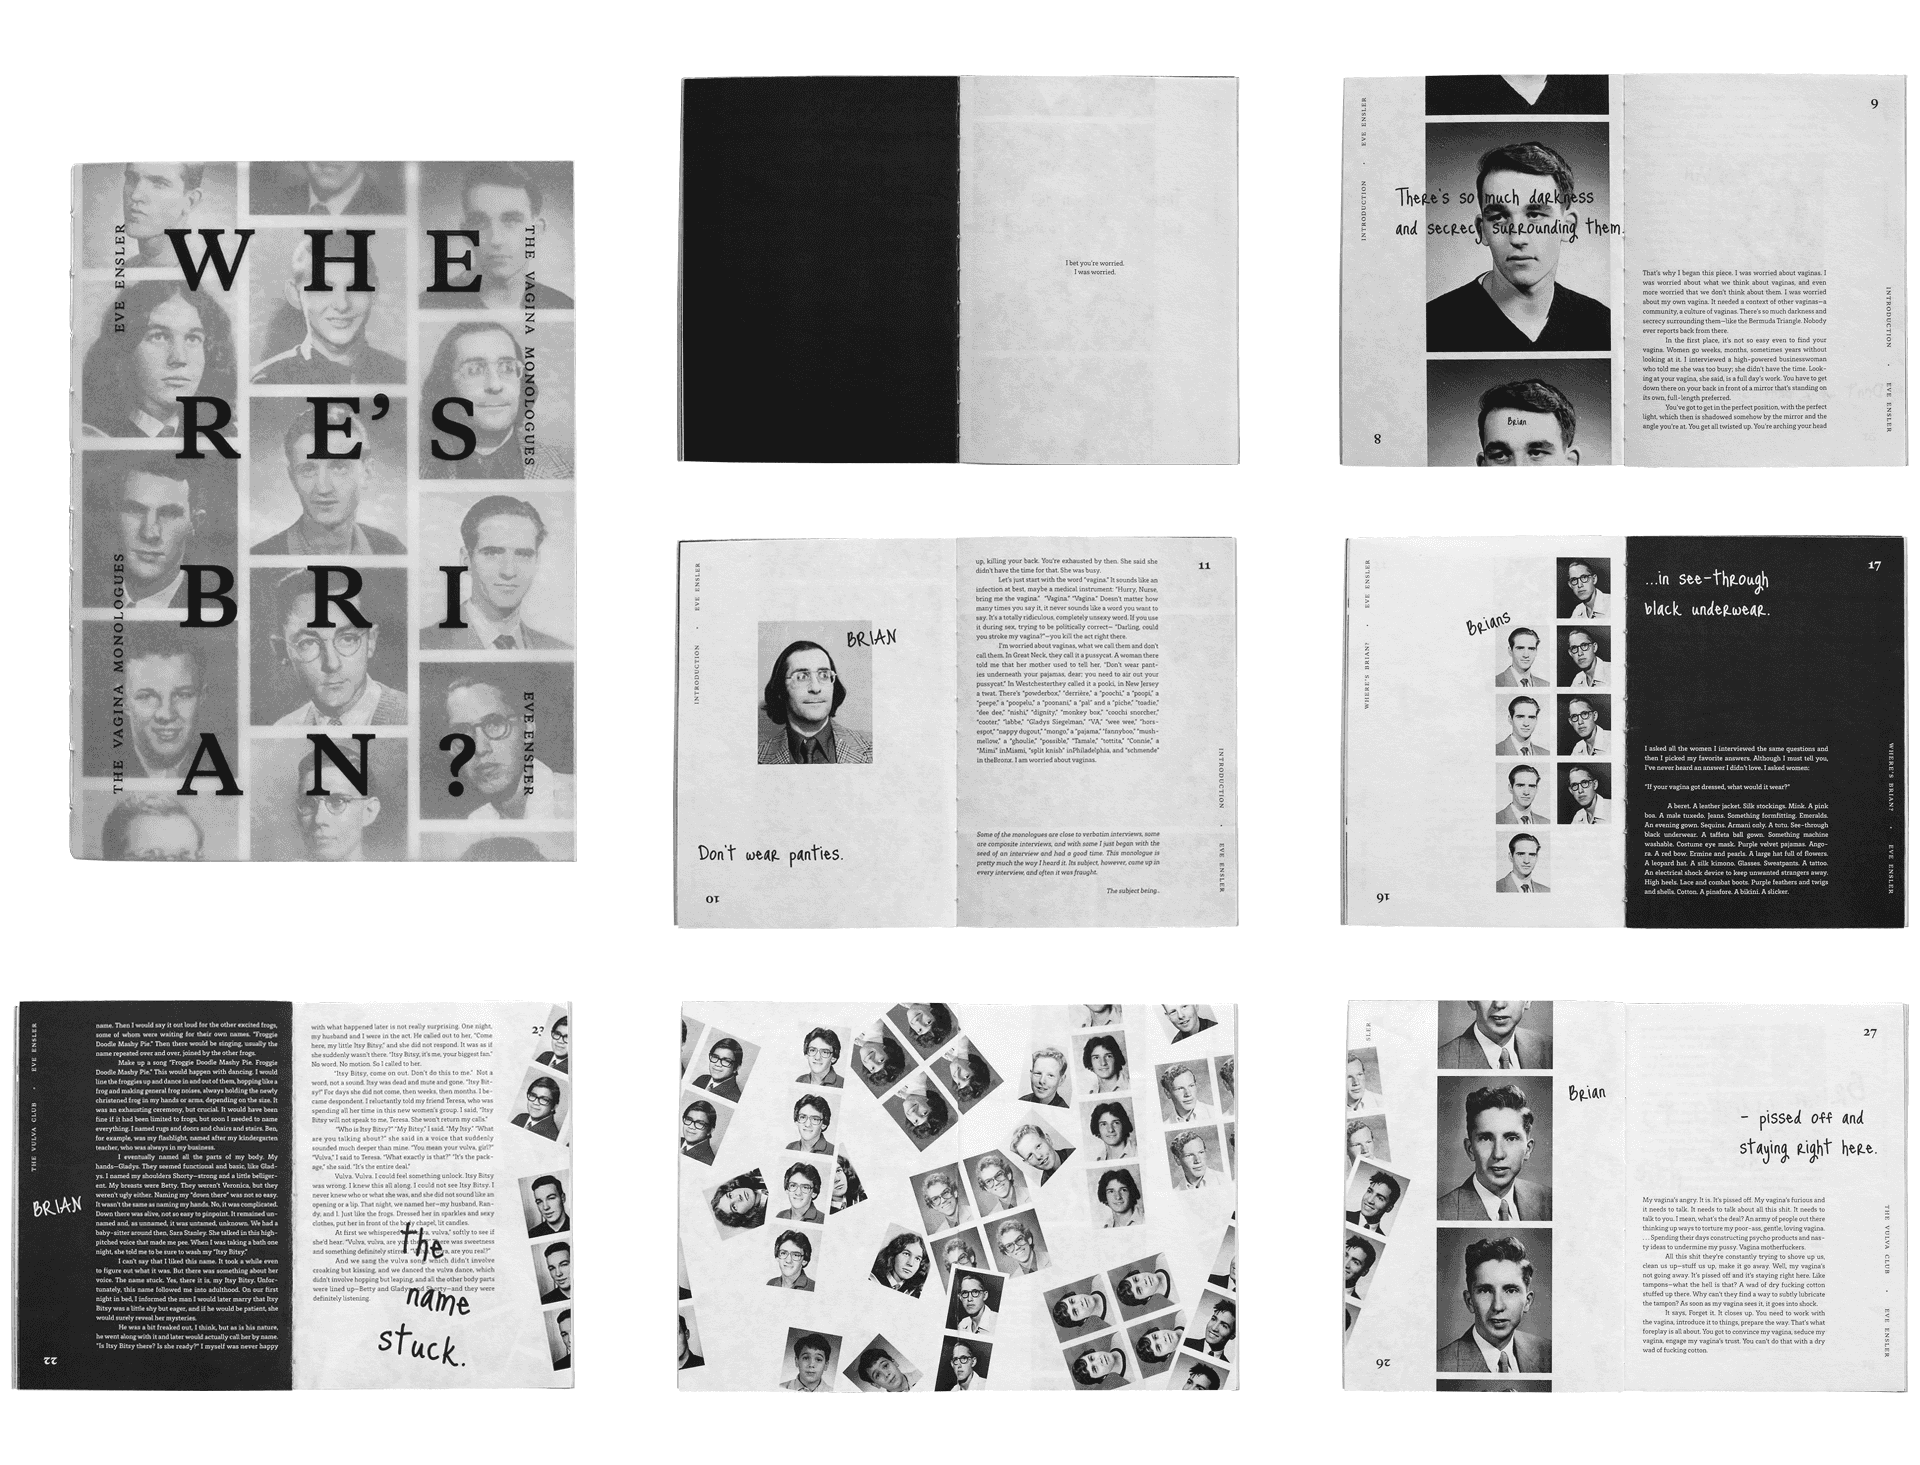 WHERE'S BRIAN? — a printed editorial book that juxtaposes a part of Eve Ensler's 'The Vagina Monologues' with old portrait photographs of male students from the 1970’s-1980’s, representing the different personas of Brian. The new narrative is solely based on one of the questions Ensler asks when interviewing women: “If your vagina could talk, what would it say, in two words?” — where one of the answers was “Where’s Brian?”. Hence the title of this book.